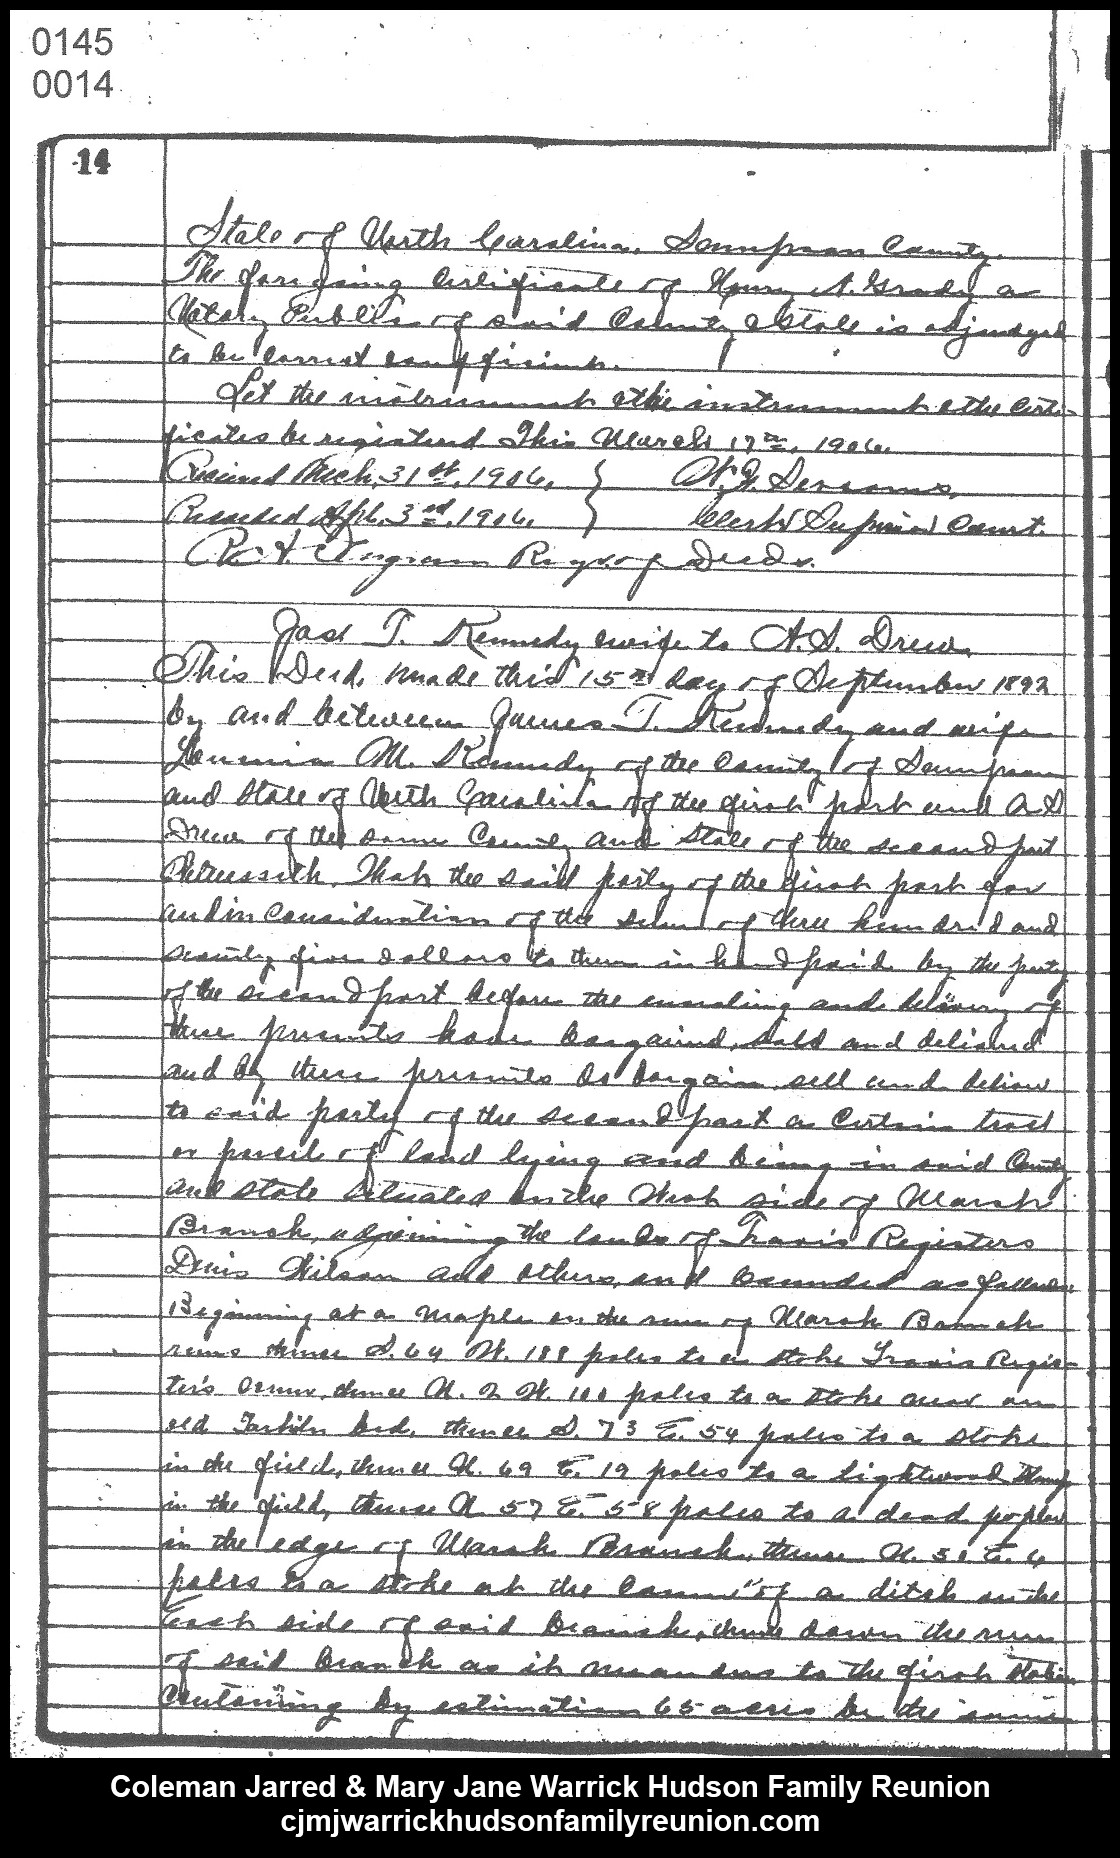 1906, 4-3 - Deed - MJ to George W. Hudson (page 3 of 3)